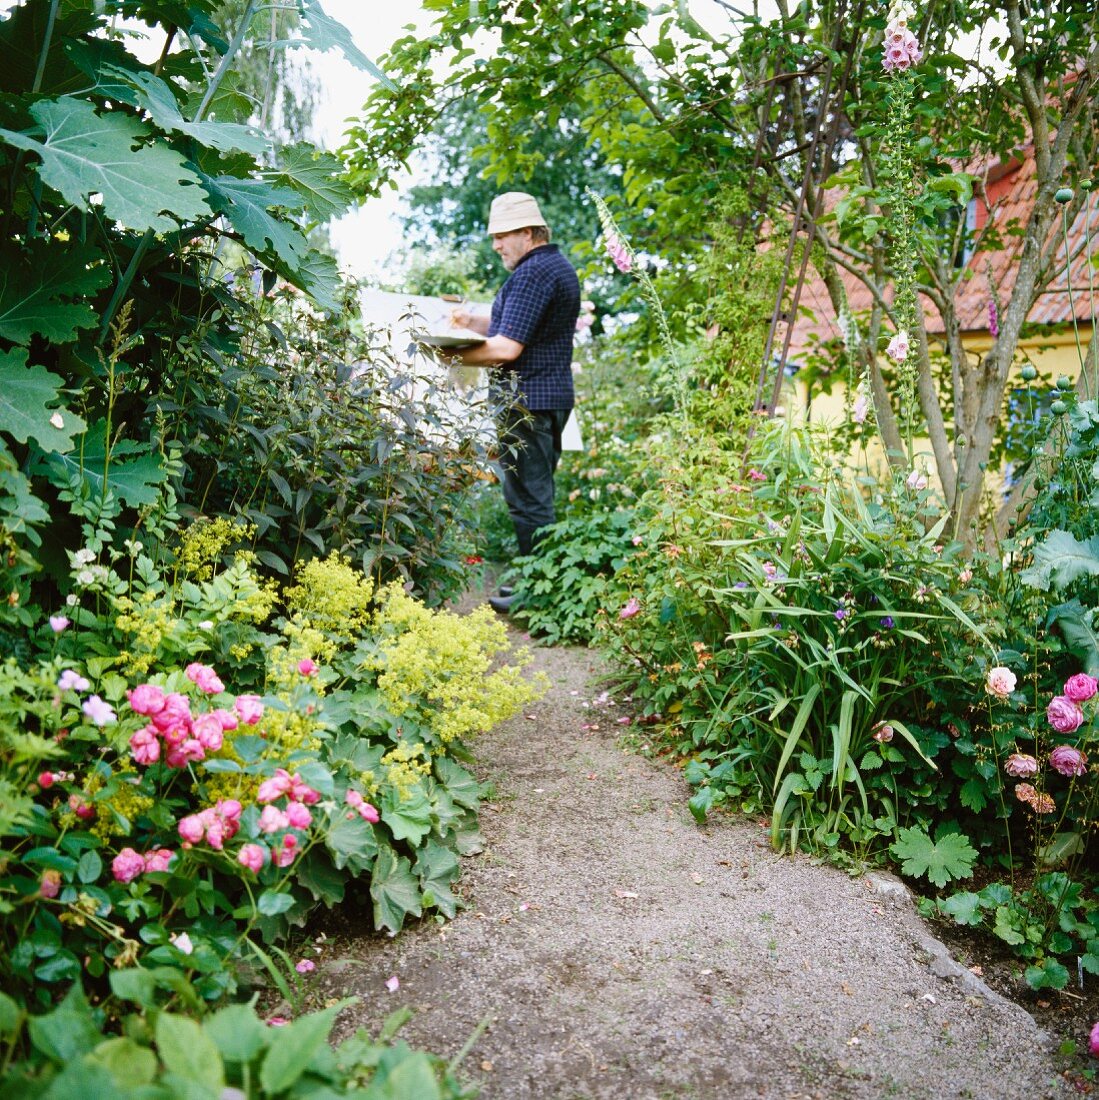 Man painting a picture on gravel path in flowering garden